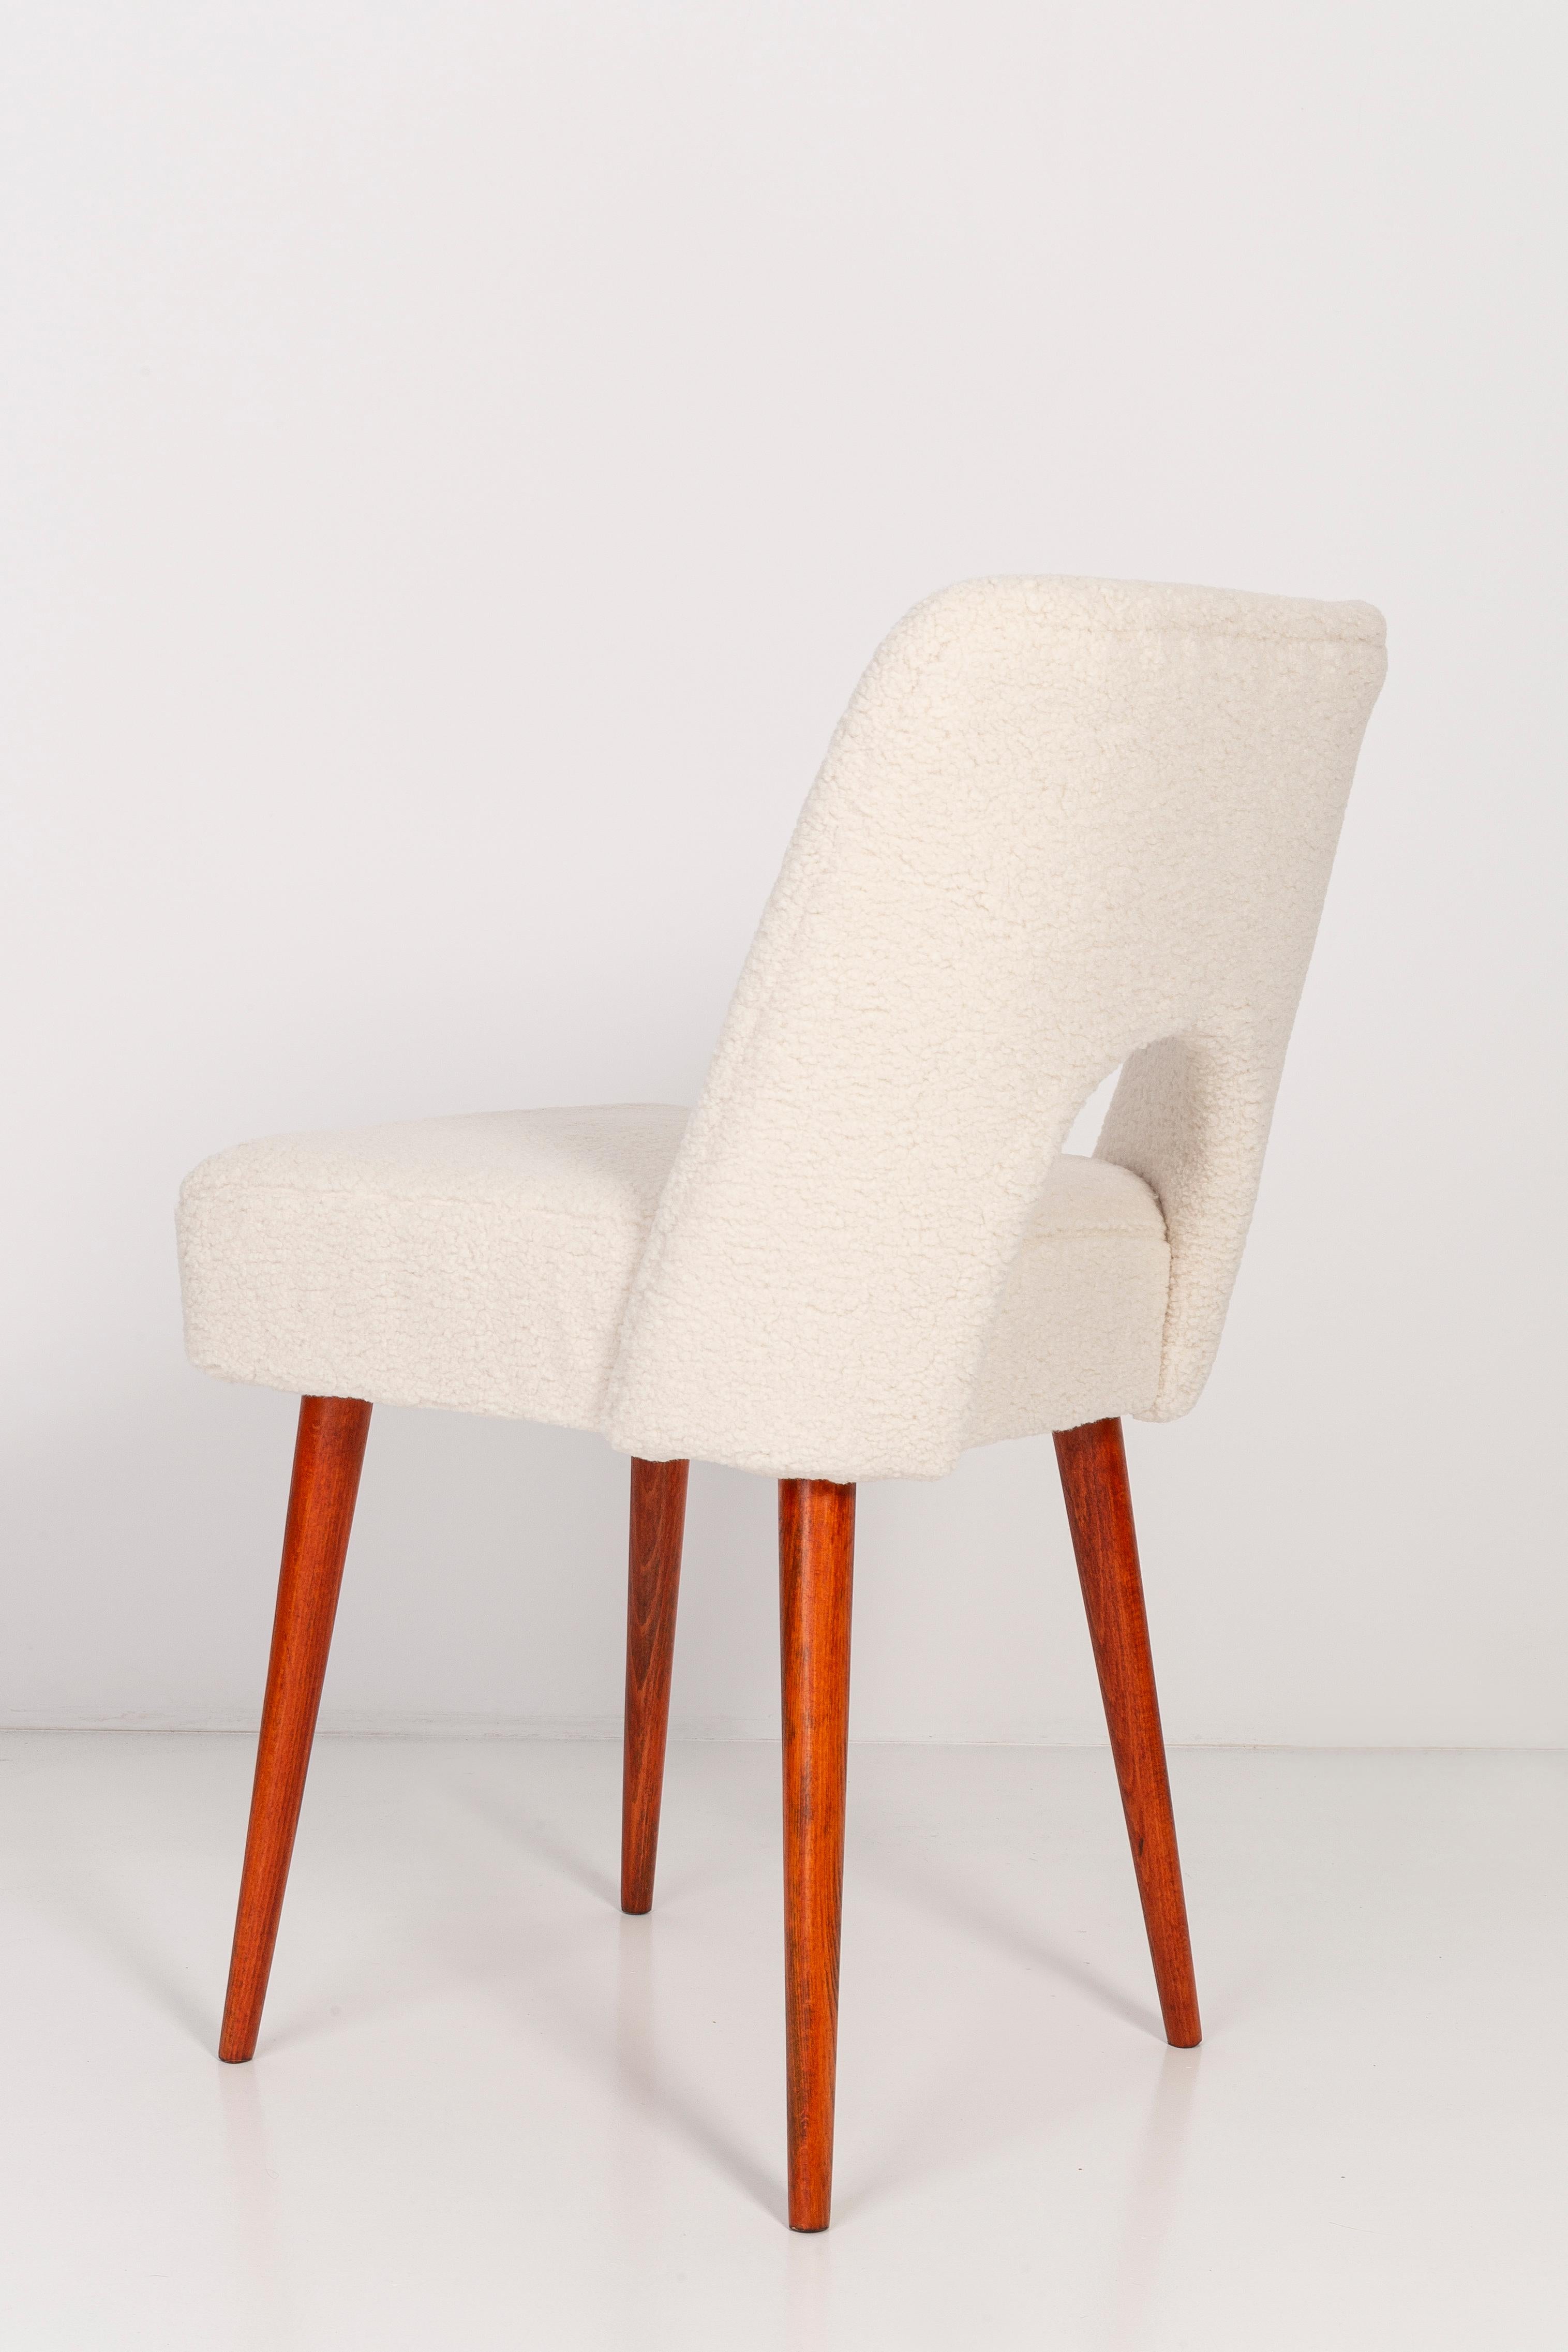 Set of Two Light Crème Boucle 'Shell' Chairs, 1960s For Sale 3